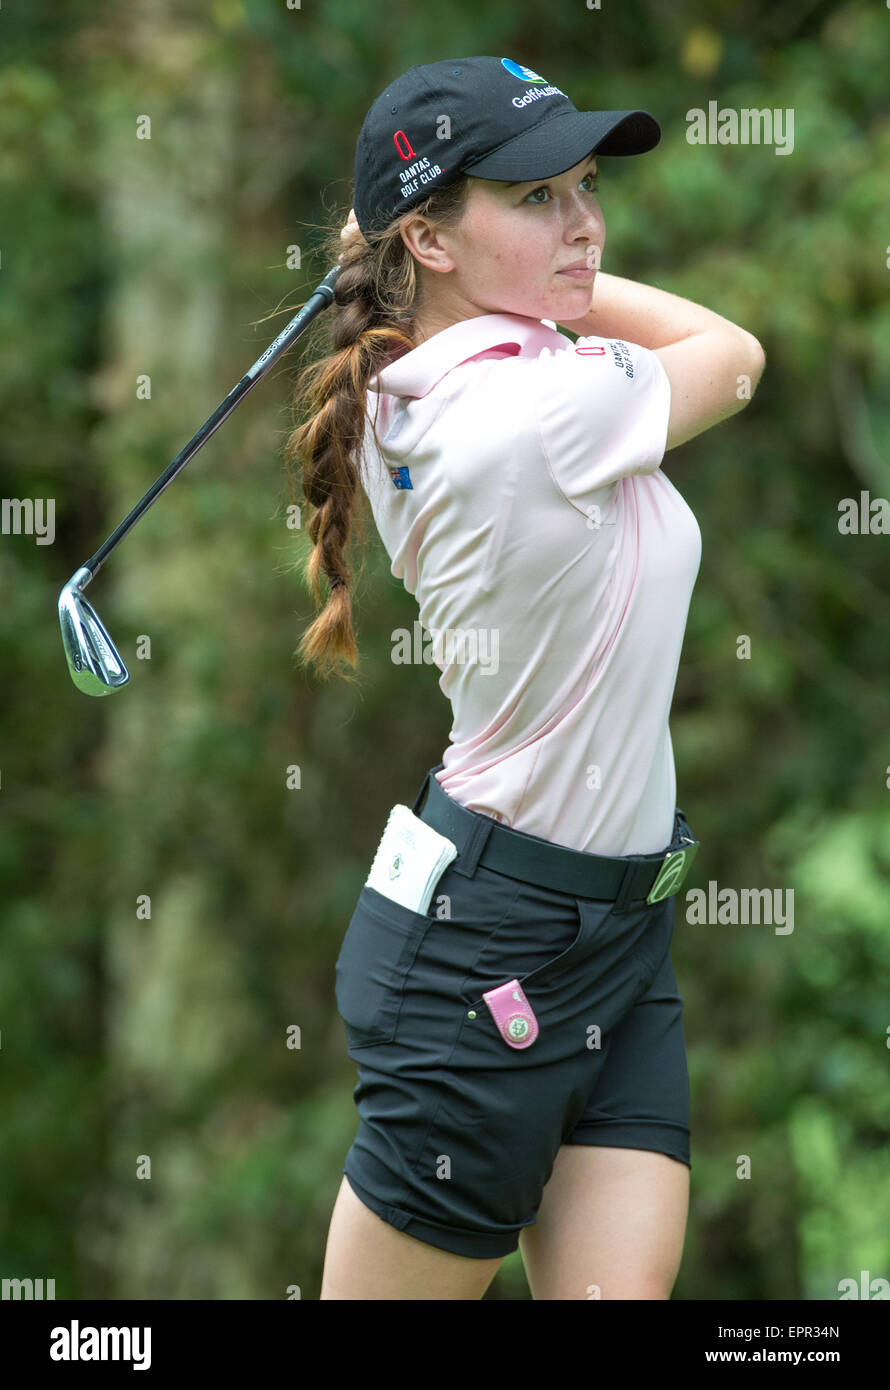 Hong Kong. May, 2015. Rebecca Kay from Queensland Australia on the 17th tee .2nd Round of the 37th Queen Sirikit Asia-Pacific Ladies golf tournament. Hong Kong Kong Golf Club New